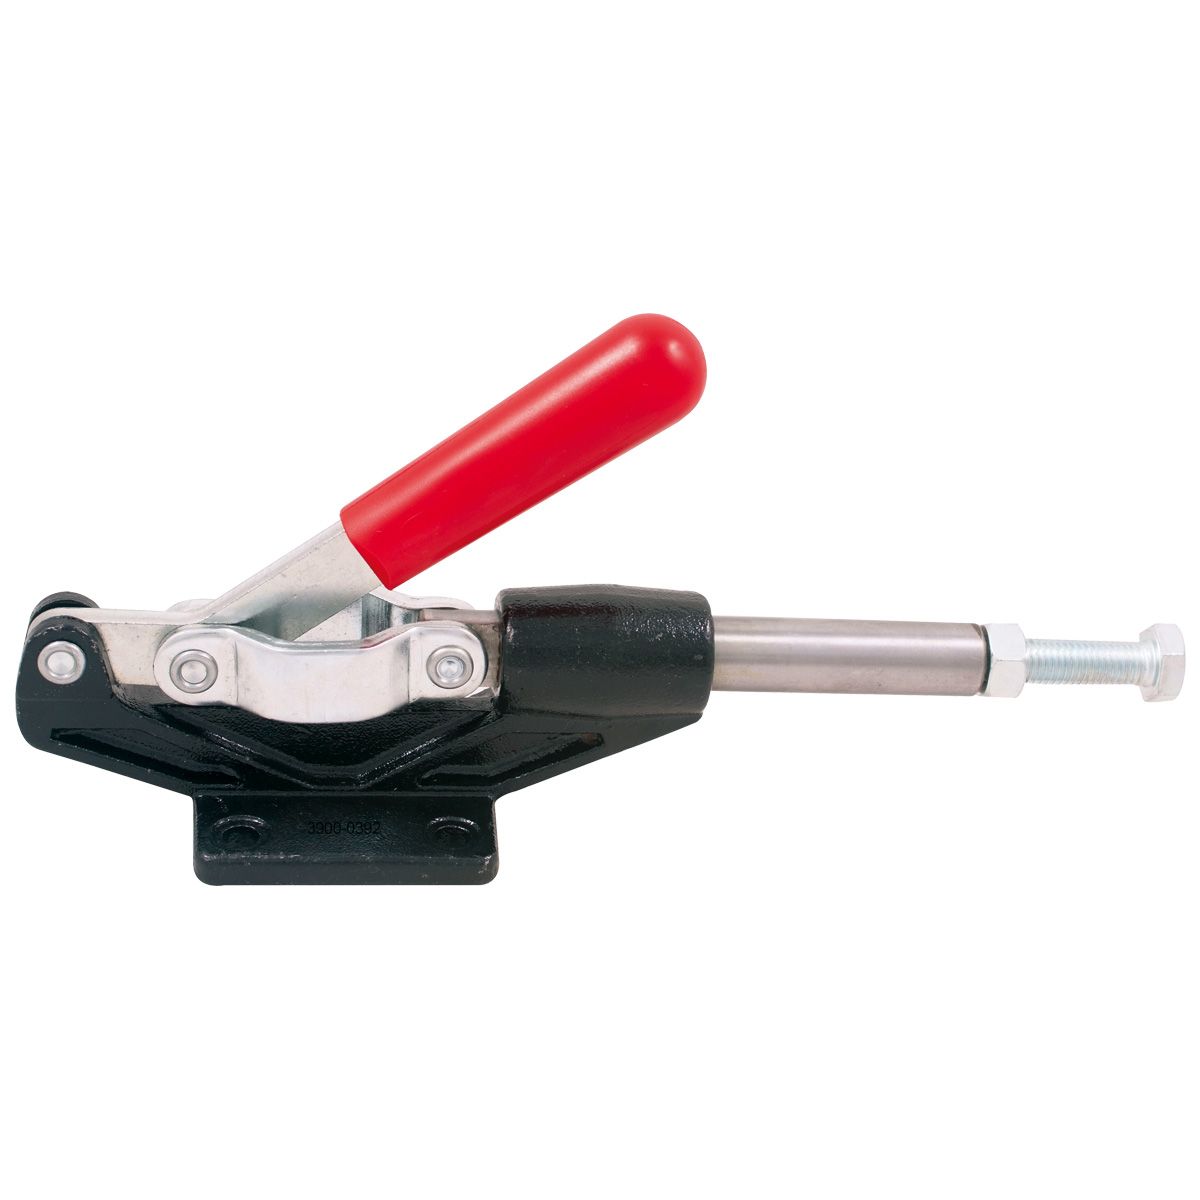 PUSH & PULL CLAMP WITH 90 DEGREE HANDLE & 800 LBS HOLDING CAPACITY (3900-0391)